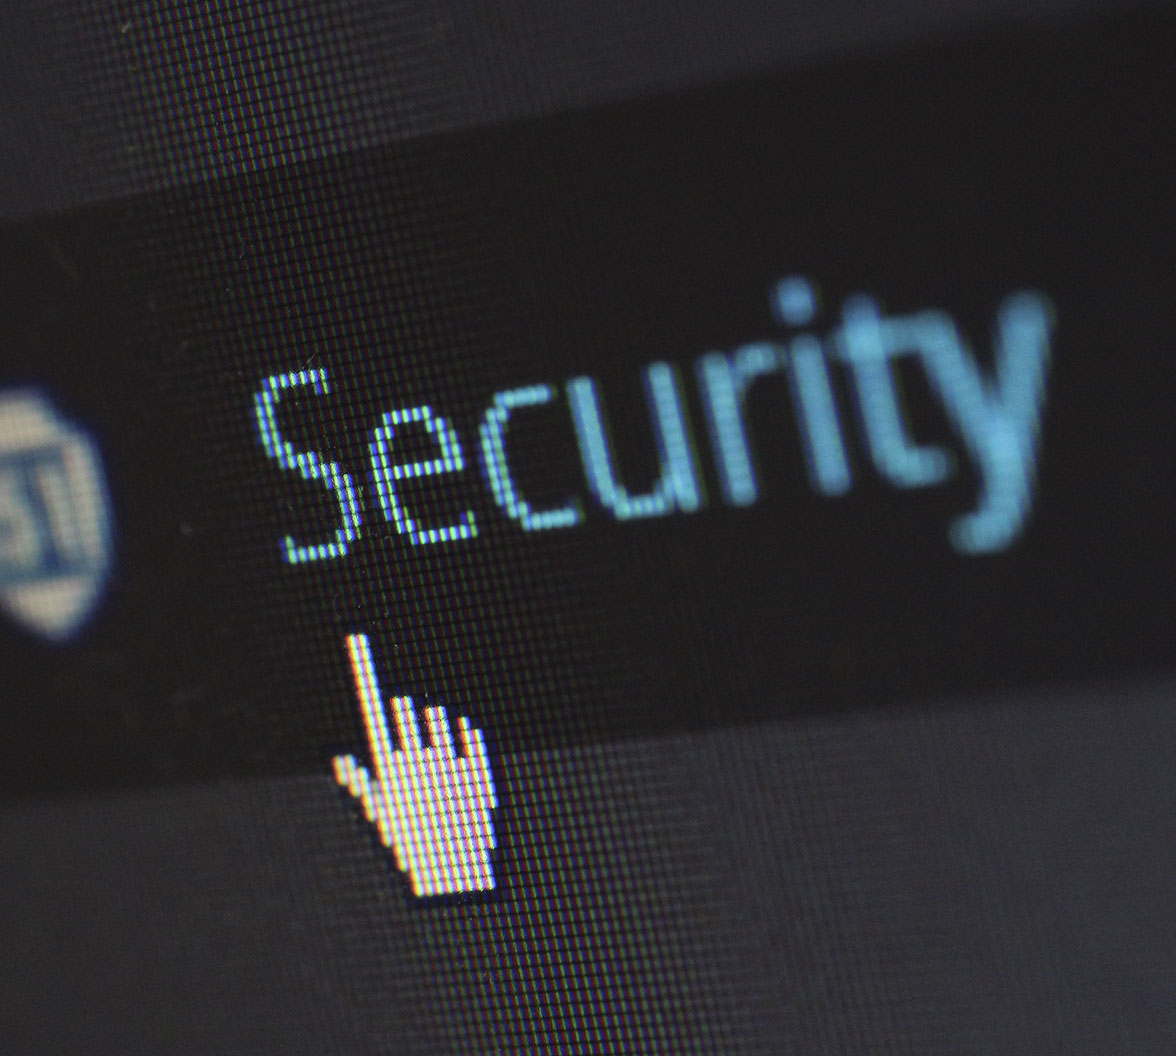 Managing Third-Party Assets Security Risks in Your Web Apps